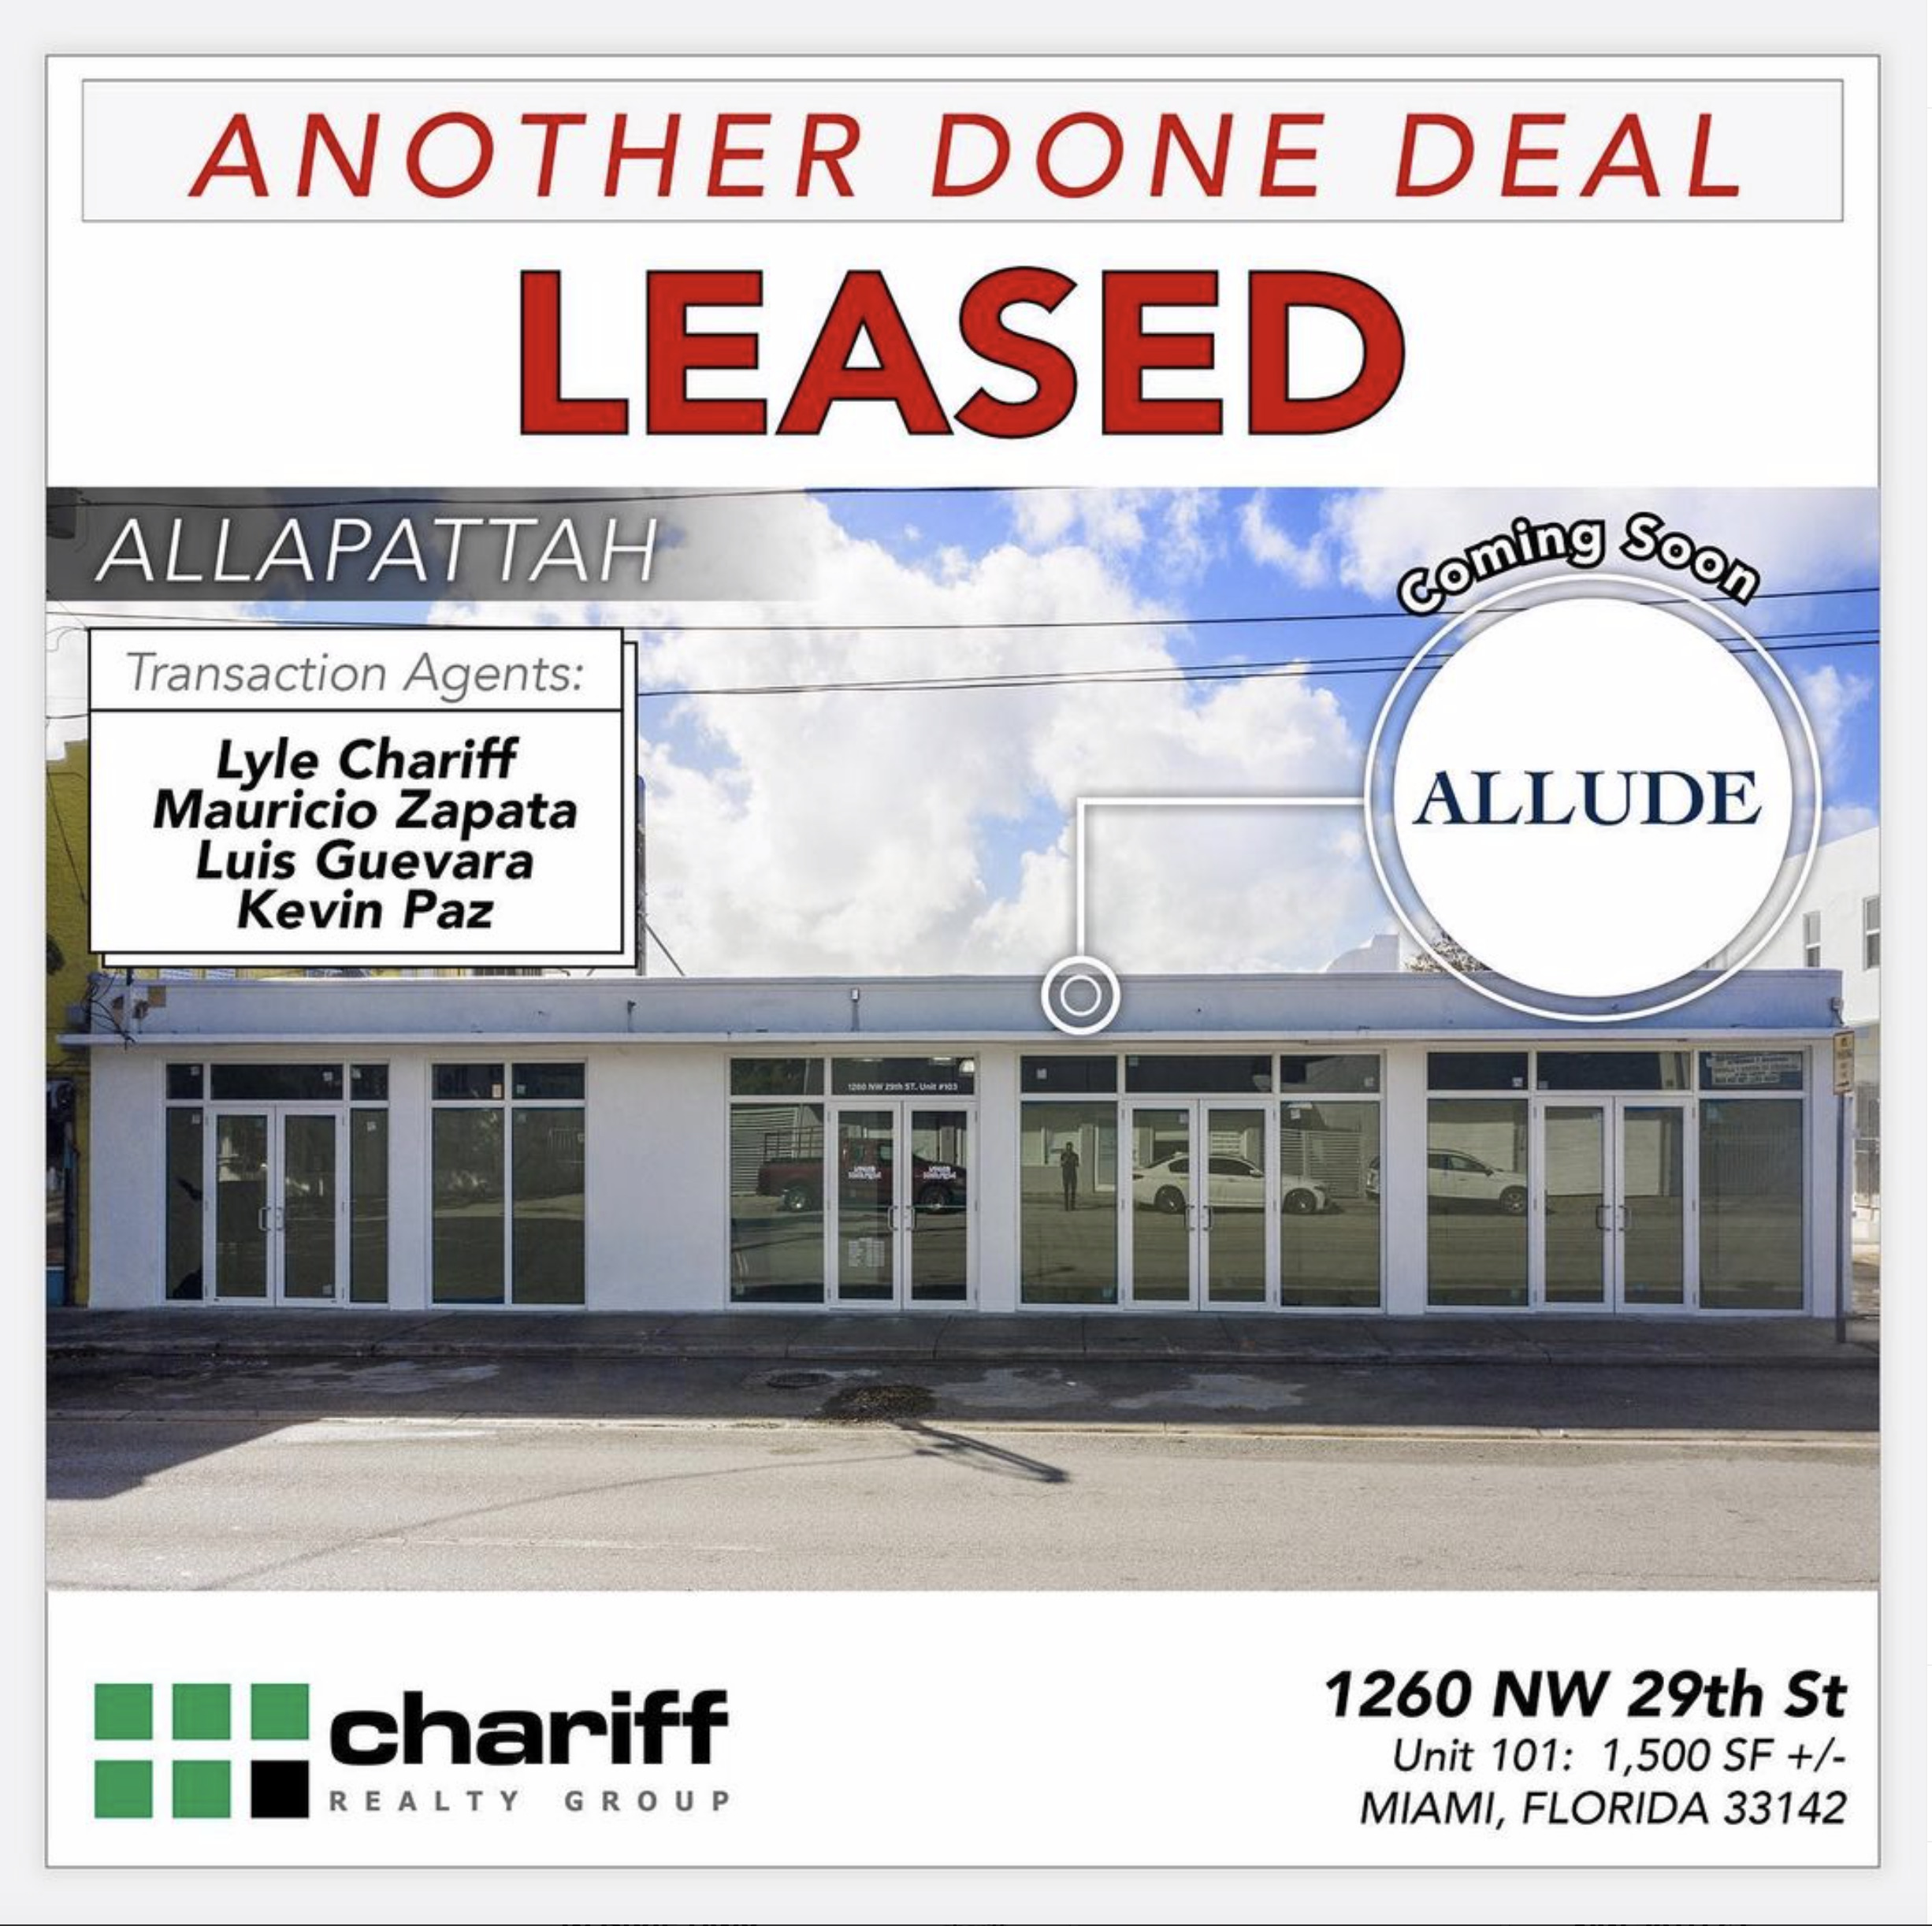 1260 NW 29th St - Another Done Deal- Leased- Allapattah -Miami-Florida-33142-Chariff Realty Group